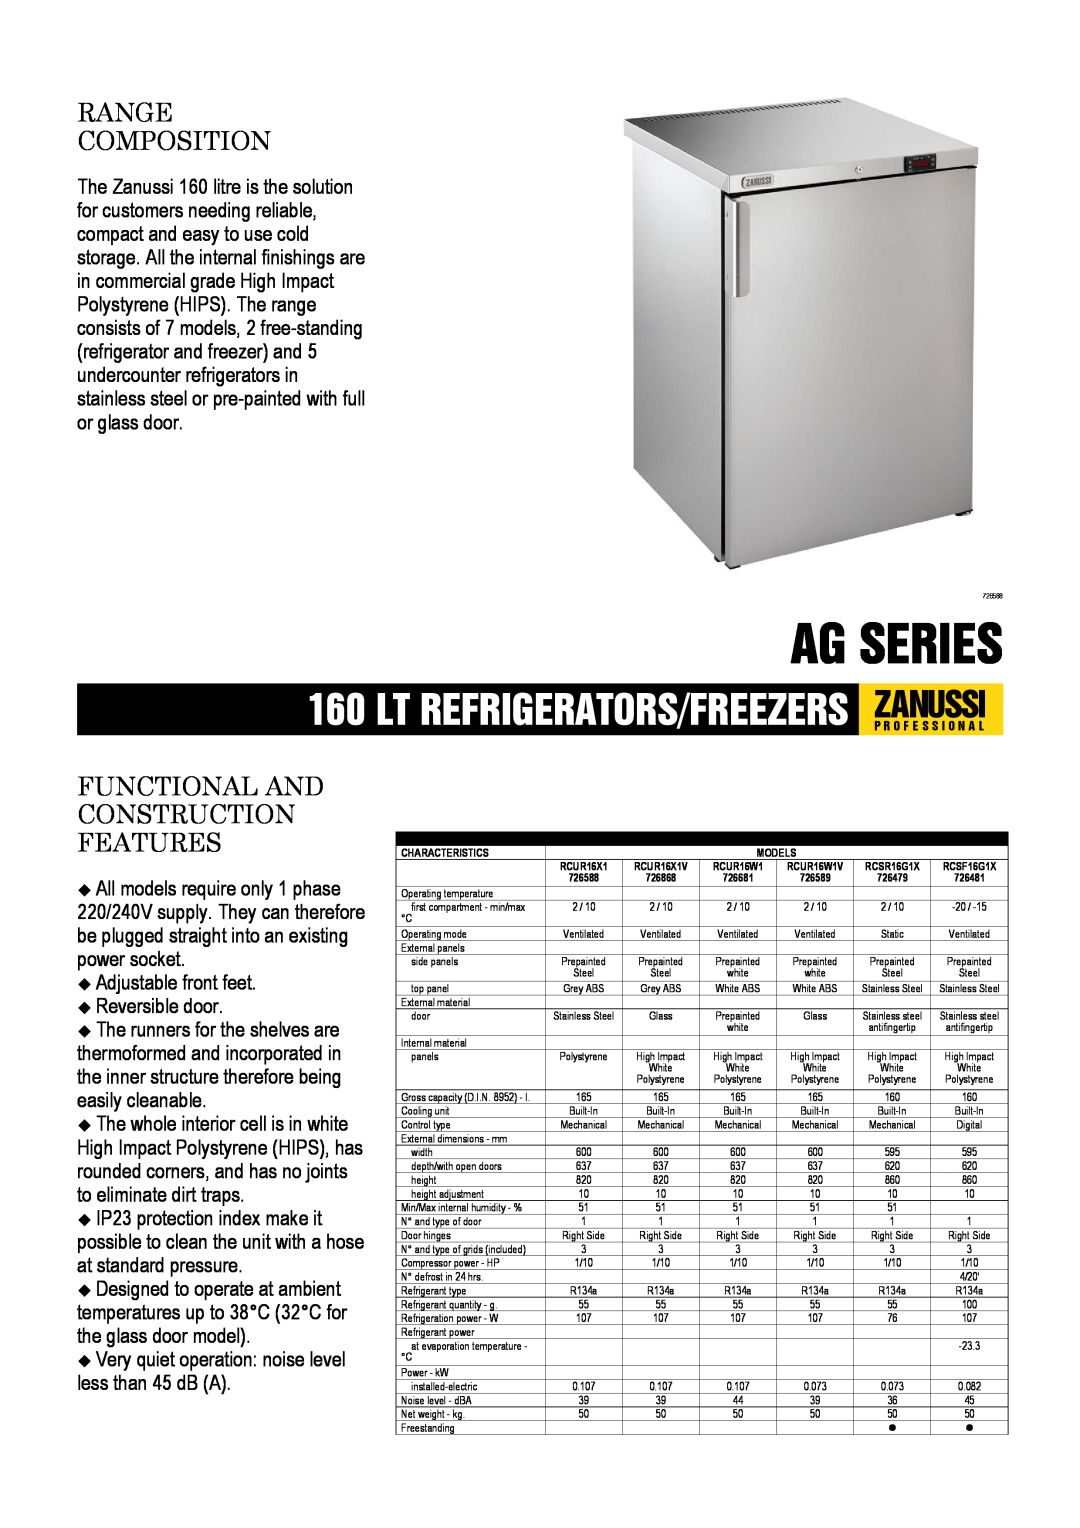 Zanussi 726681, 726481, 726589, 726588, 726868 dimensions Ag Series, Range Composition, Functional And Construction Features 